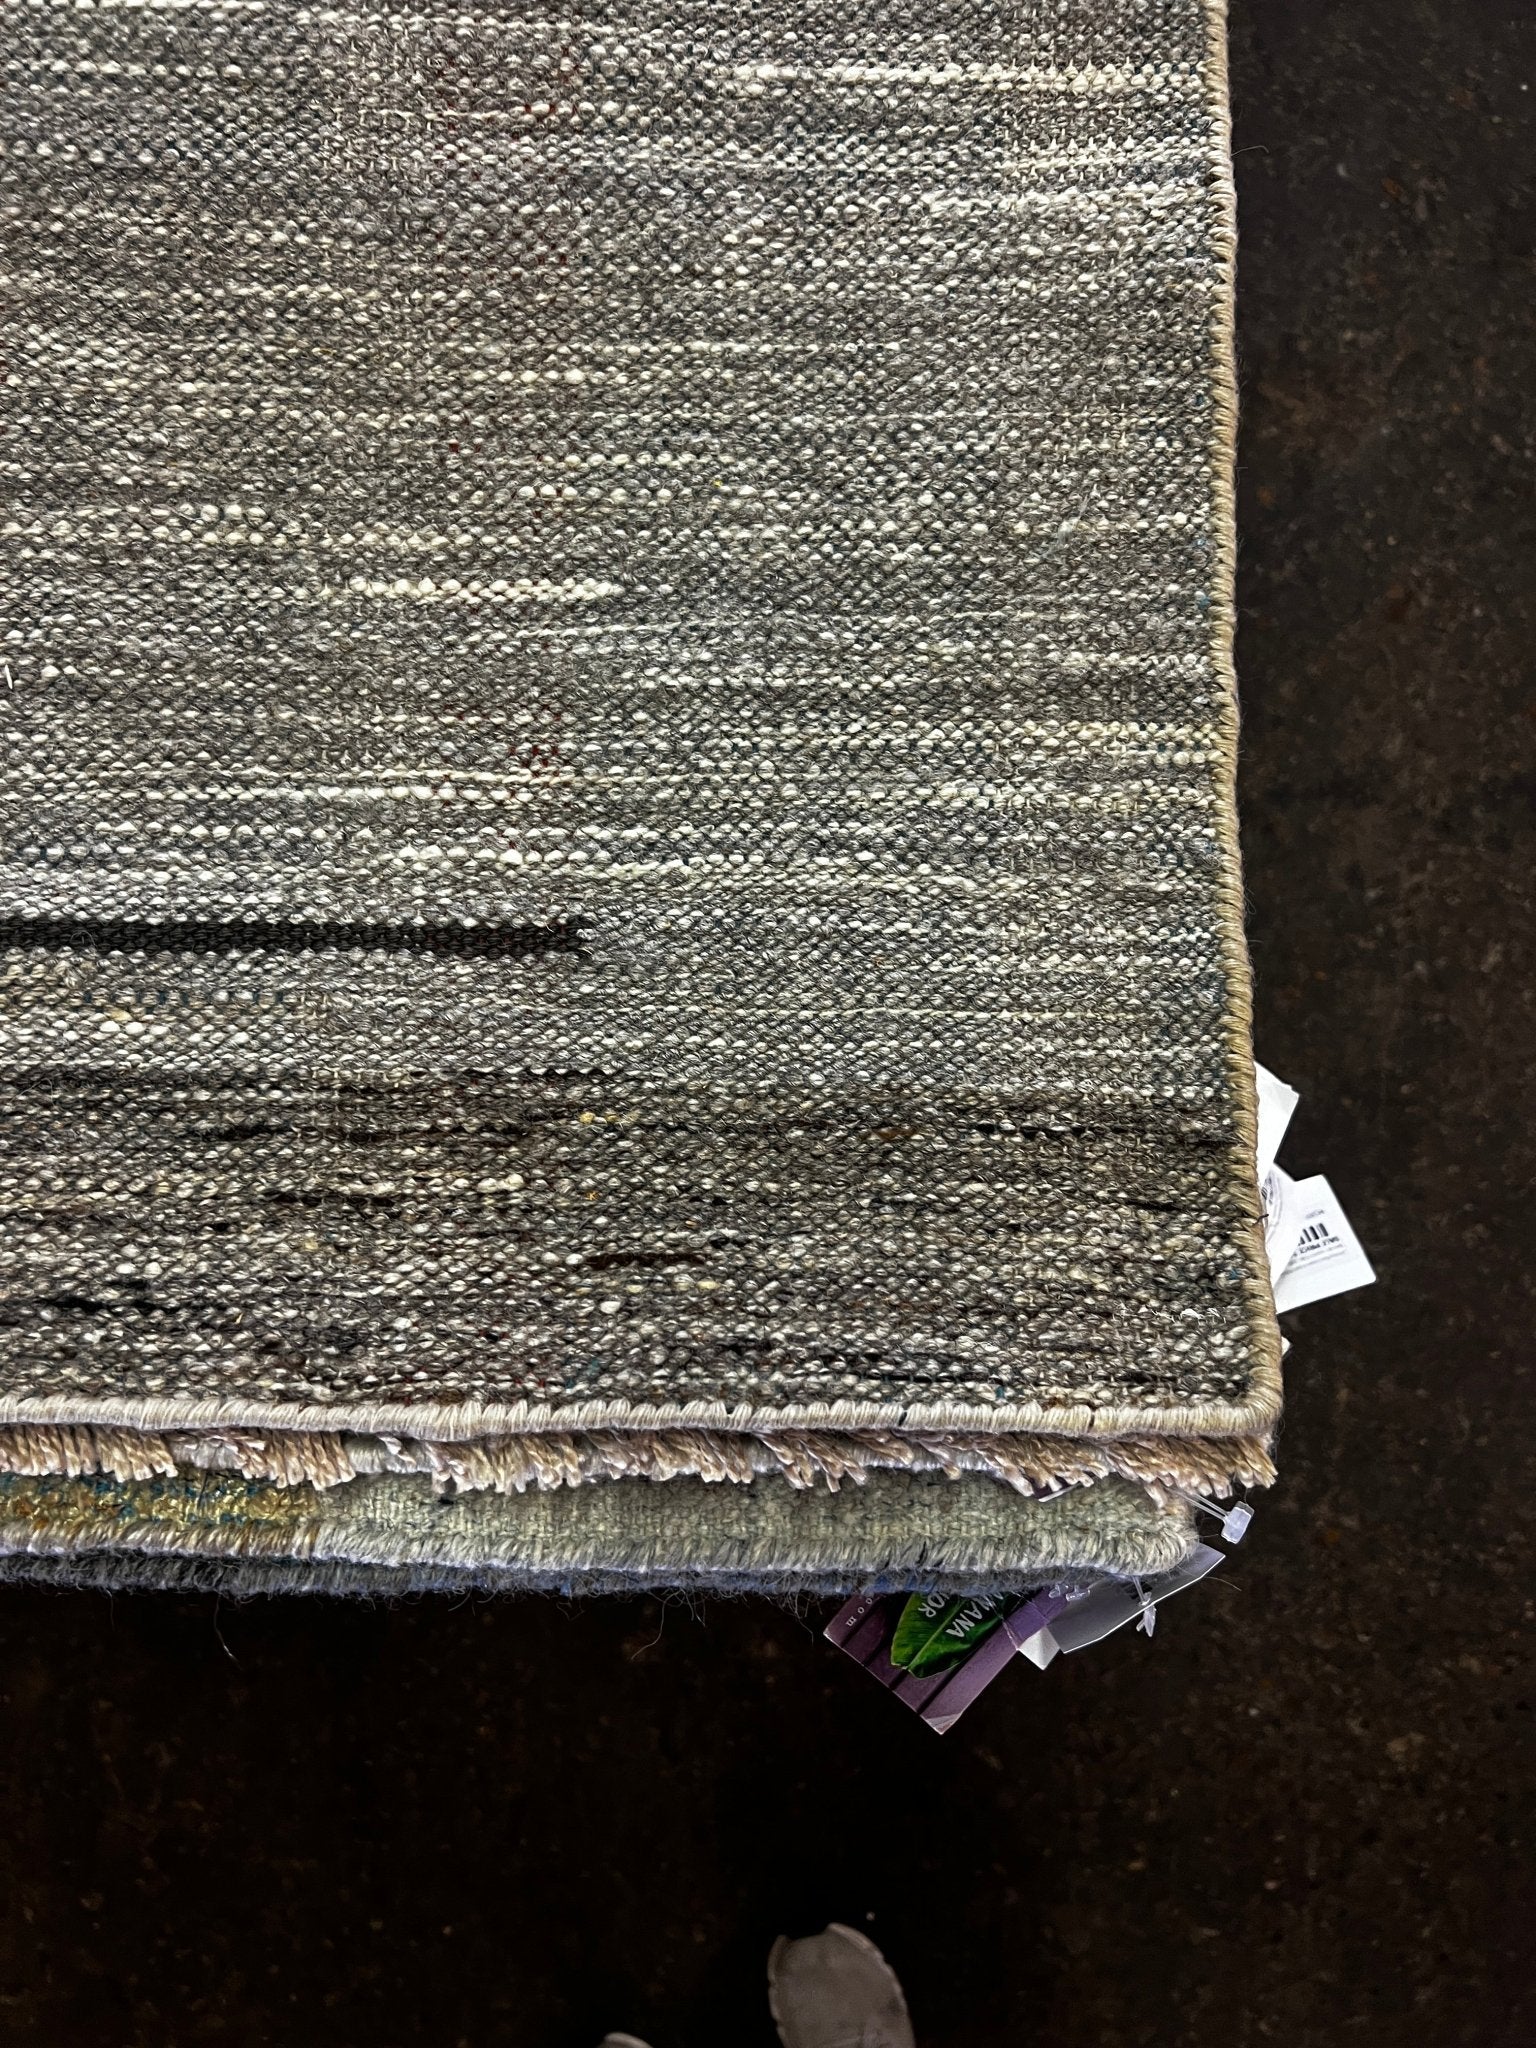 Freret 8.3x10 Handwoven Beige Lines Durrie | Banana Manor Rug Factory Outlet